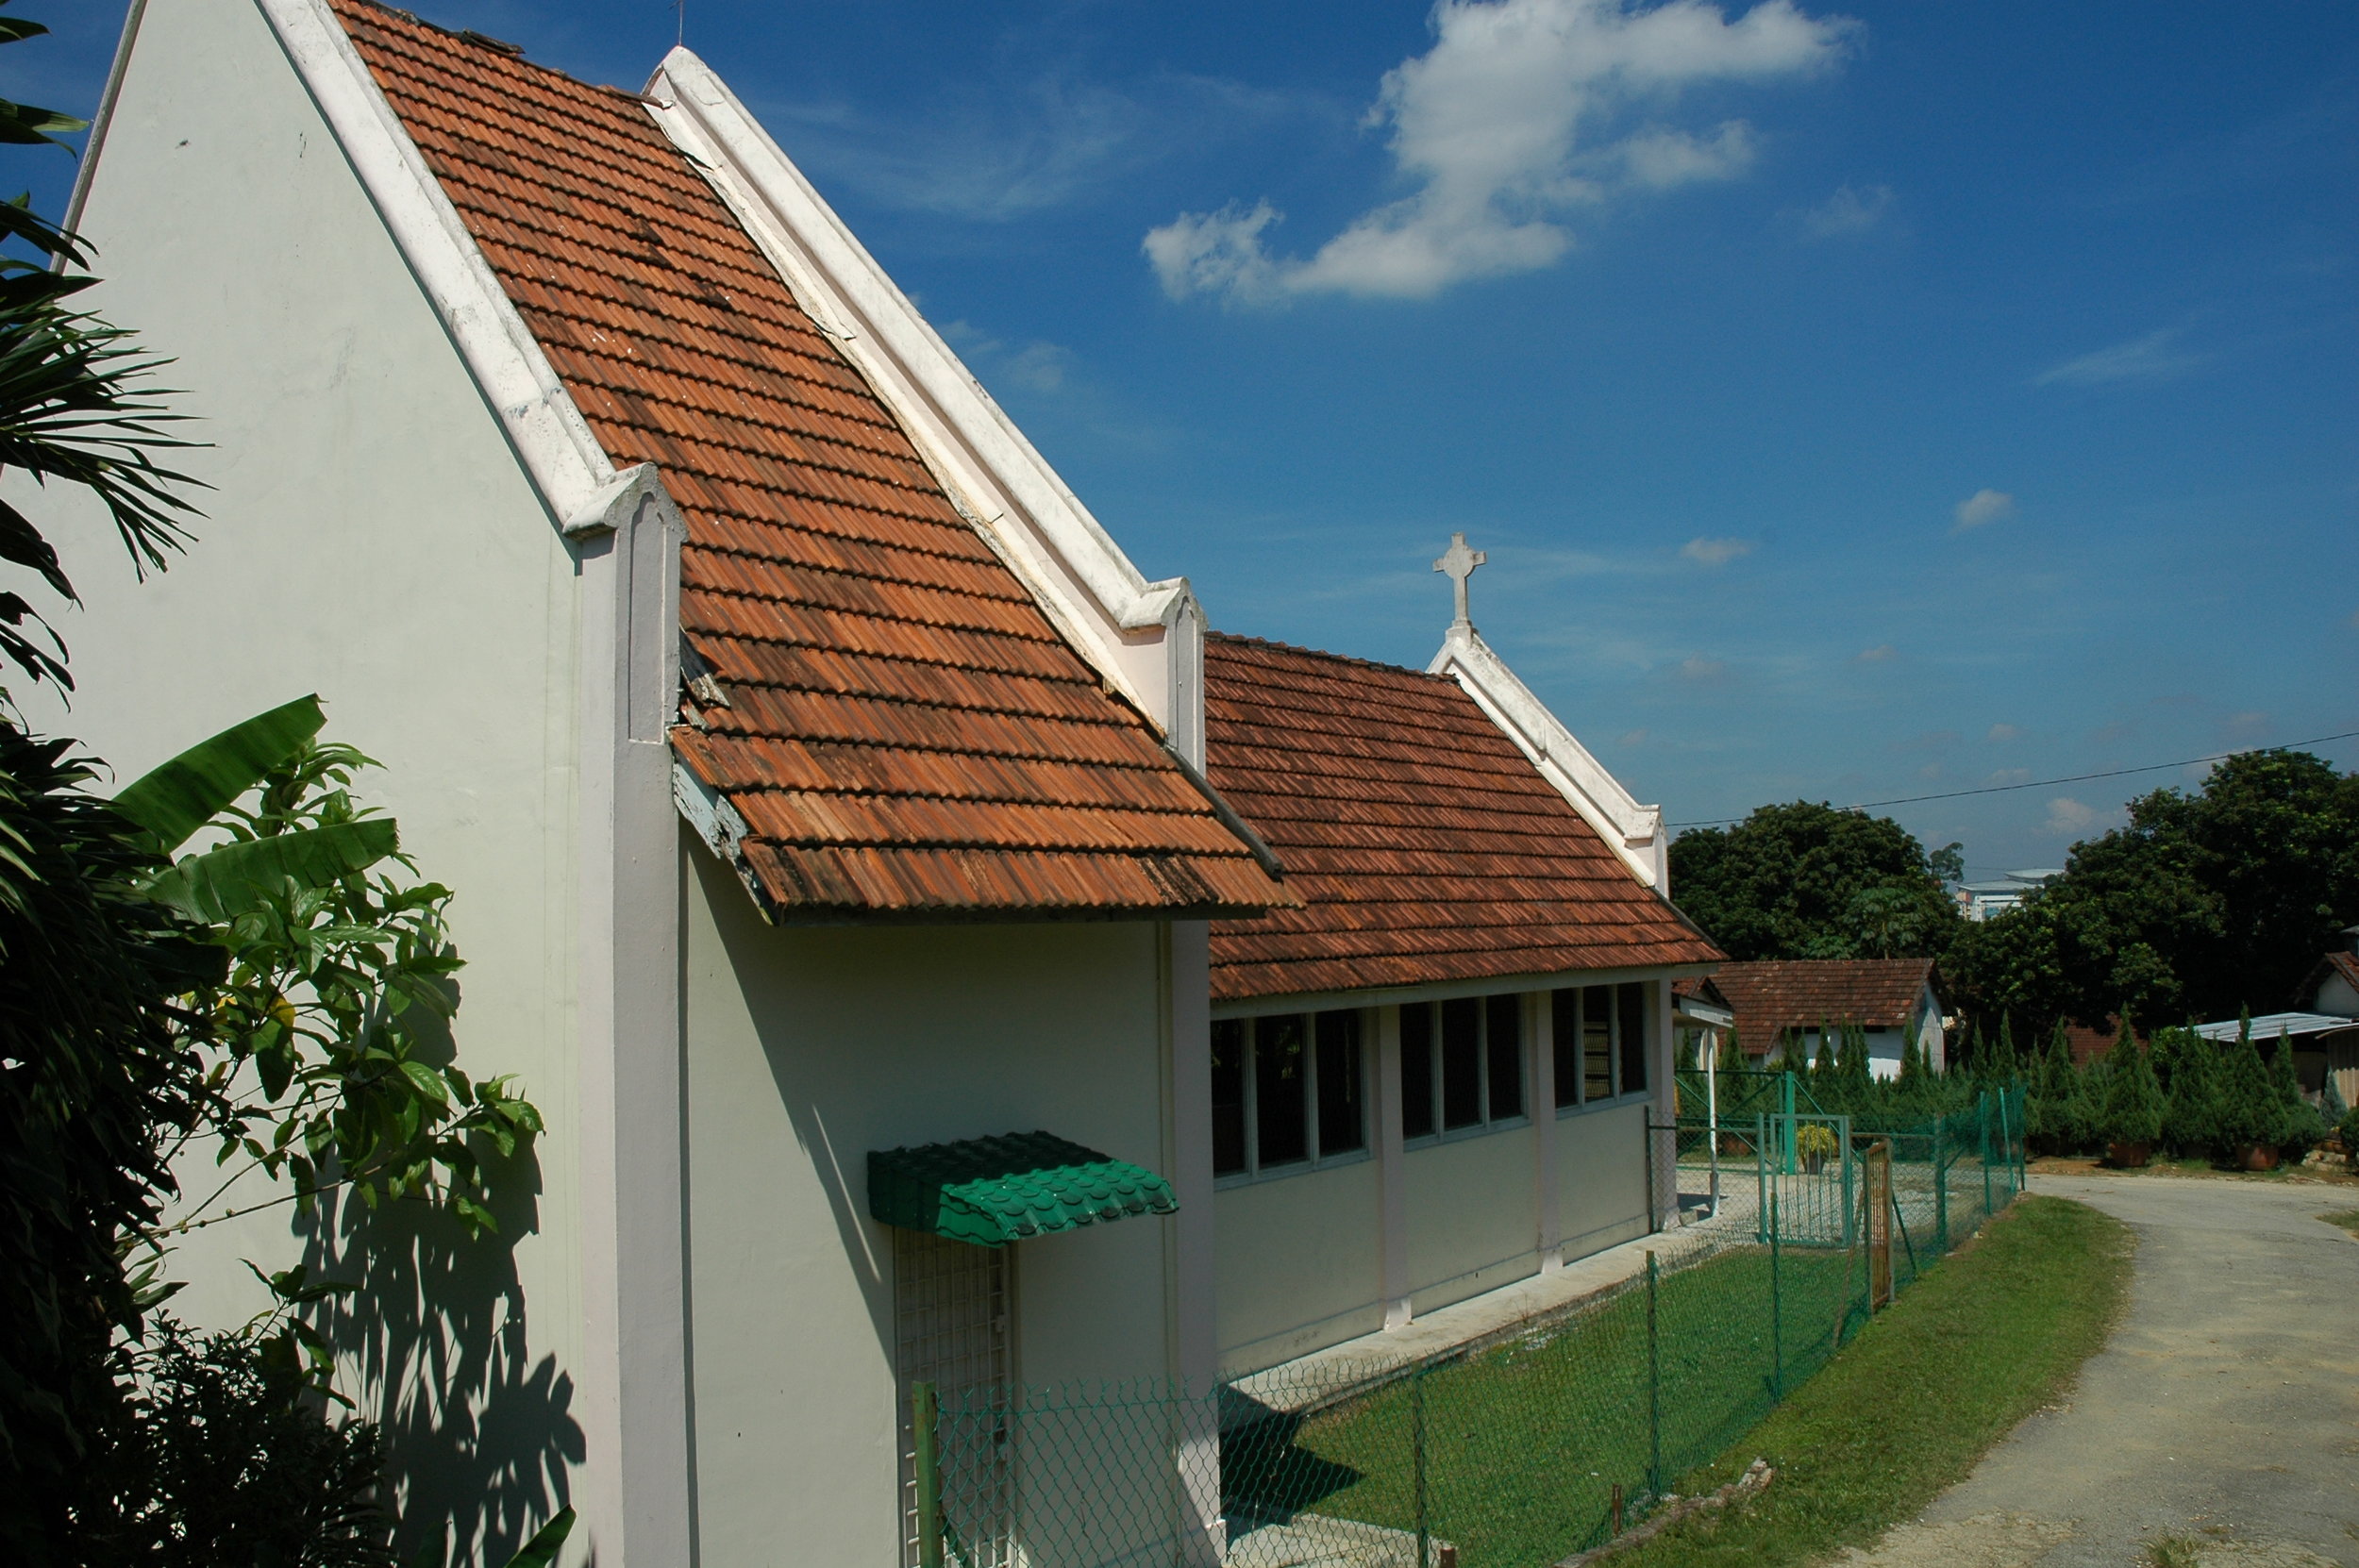 Roman Catholic Church at the East Section. (photo by Dr Lim Yong Long)